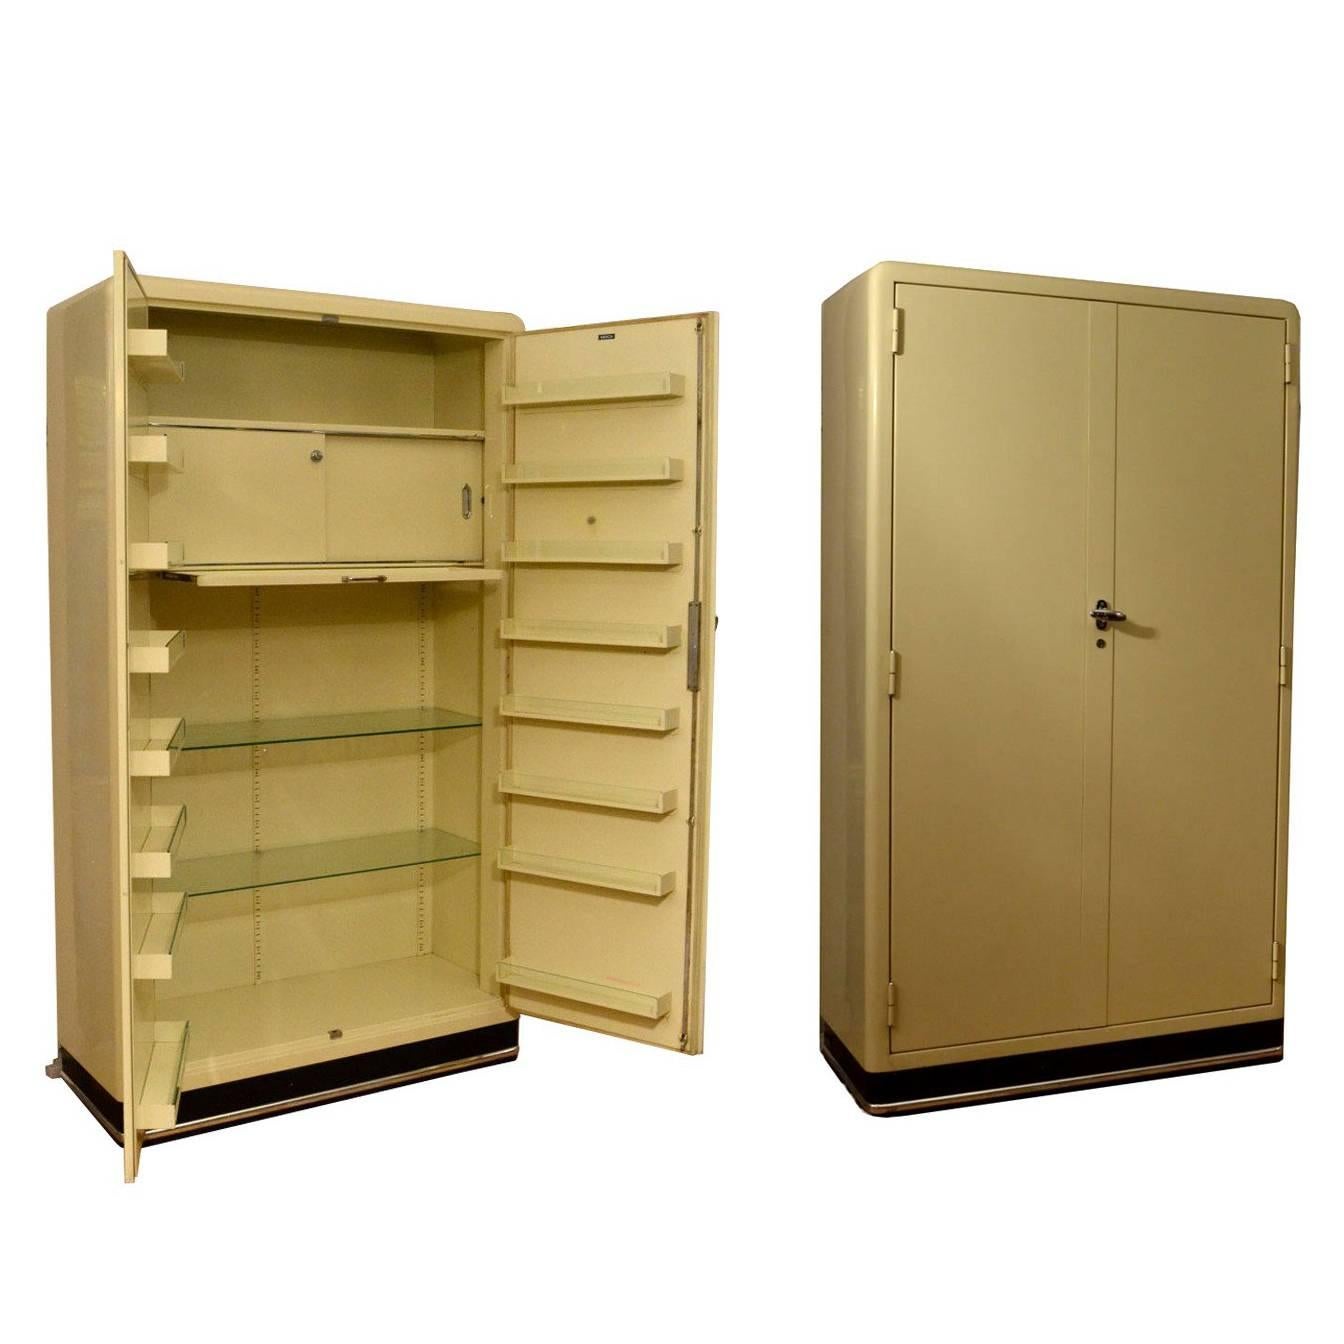 Pair of 1930s Modernist Industrial Cream Metal Pharmaceutical Storage Cabinets